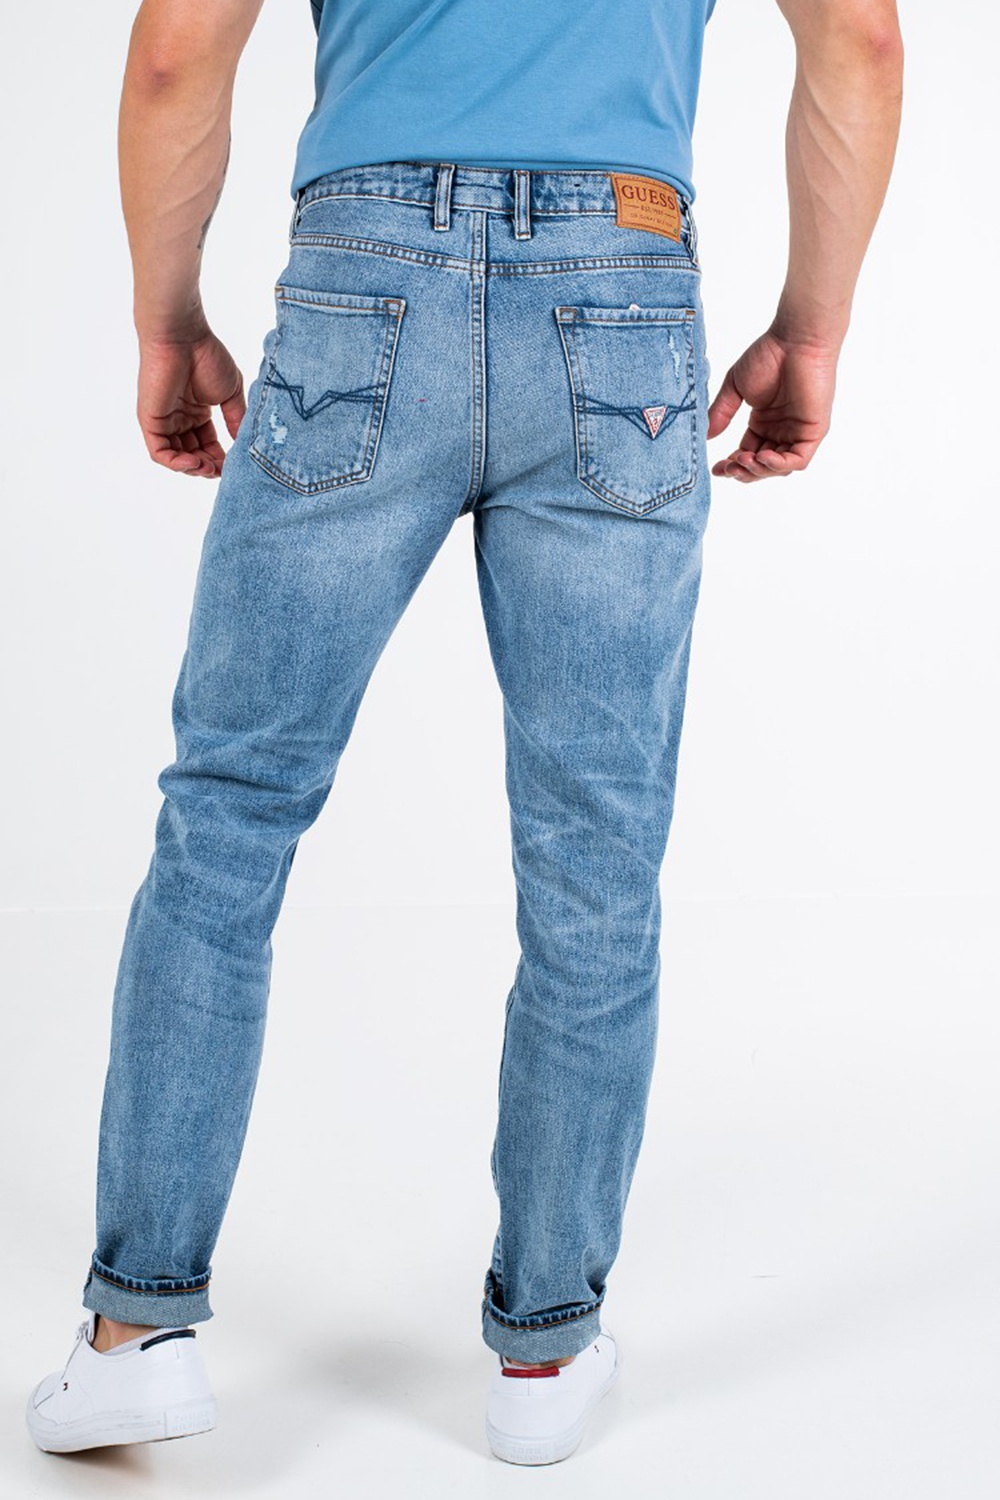 Guess Denim Ripped Men's Jeans